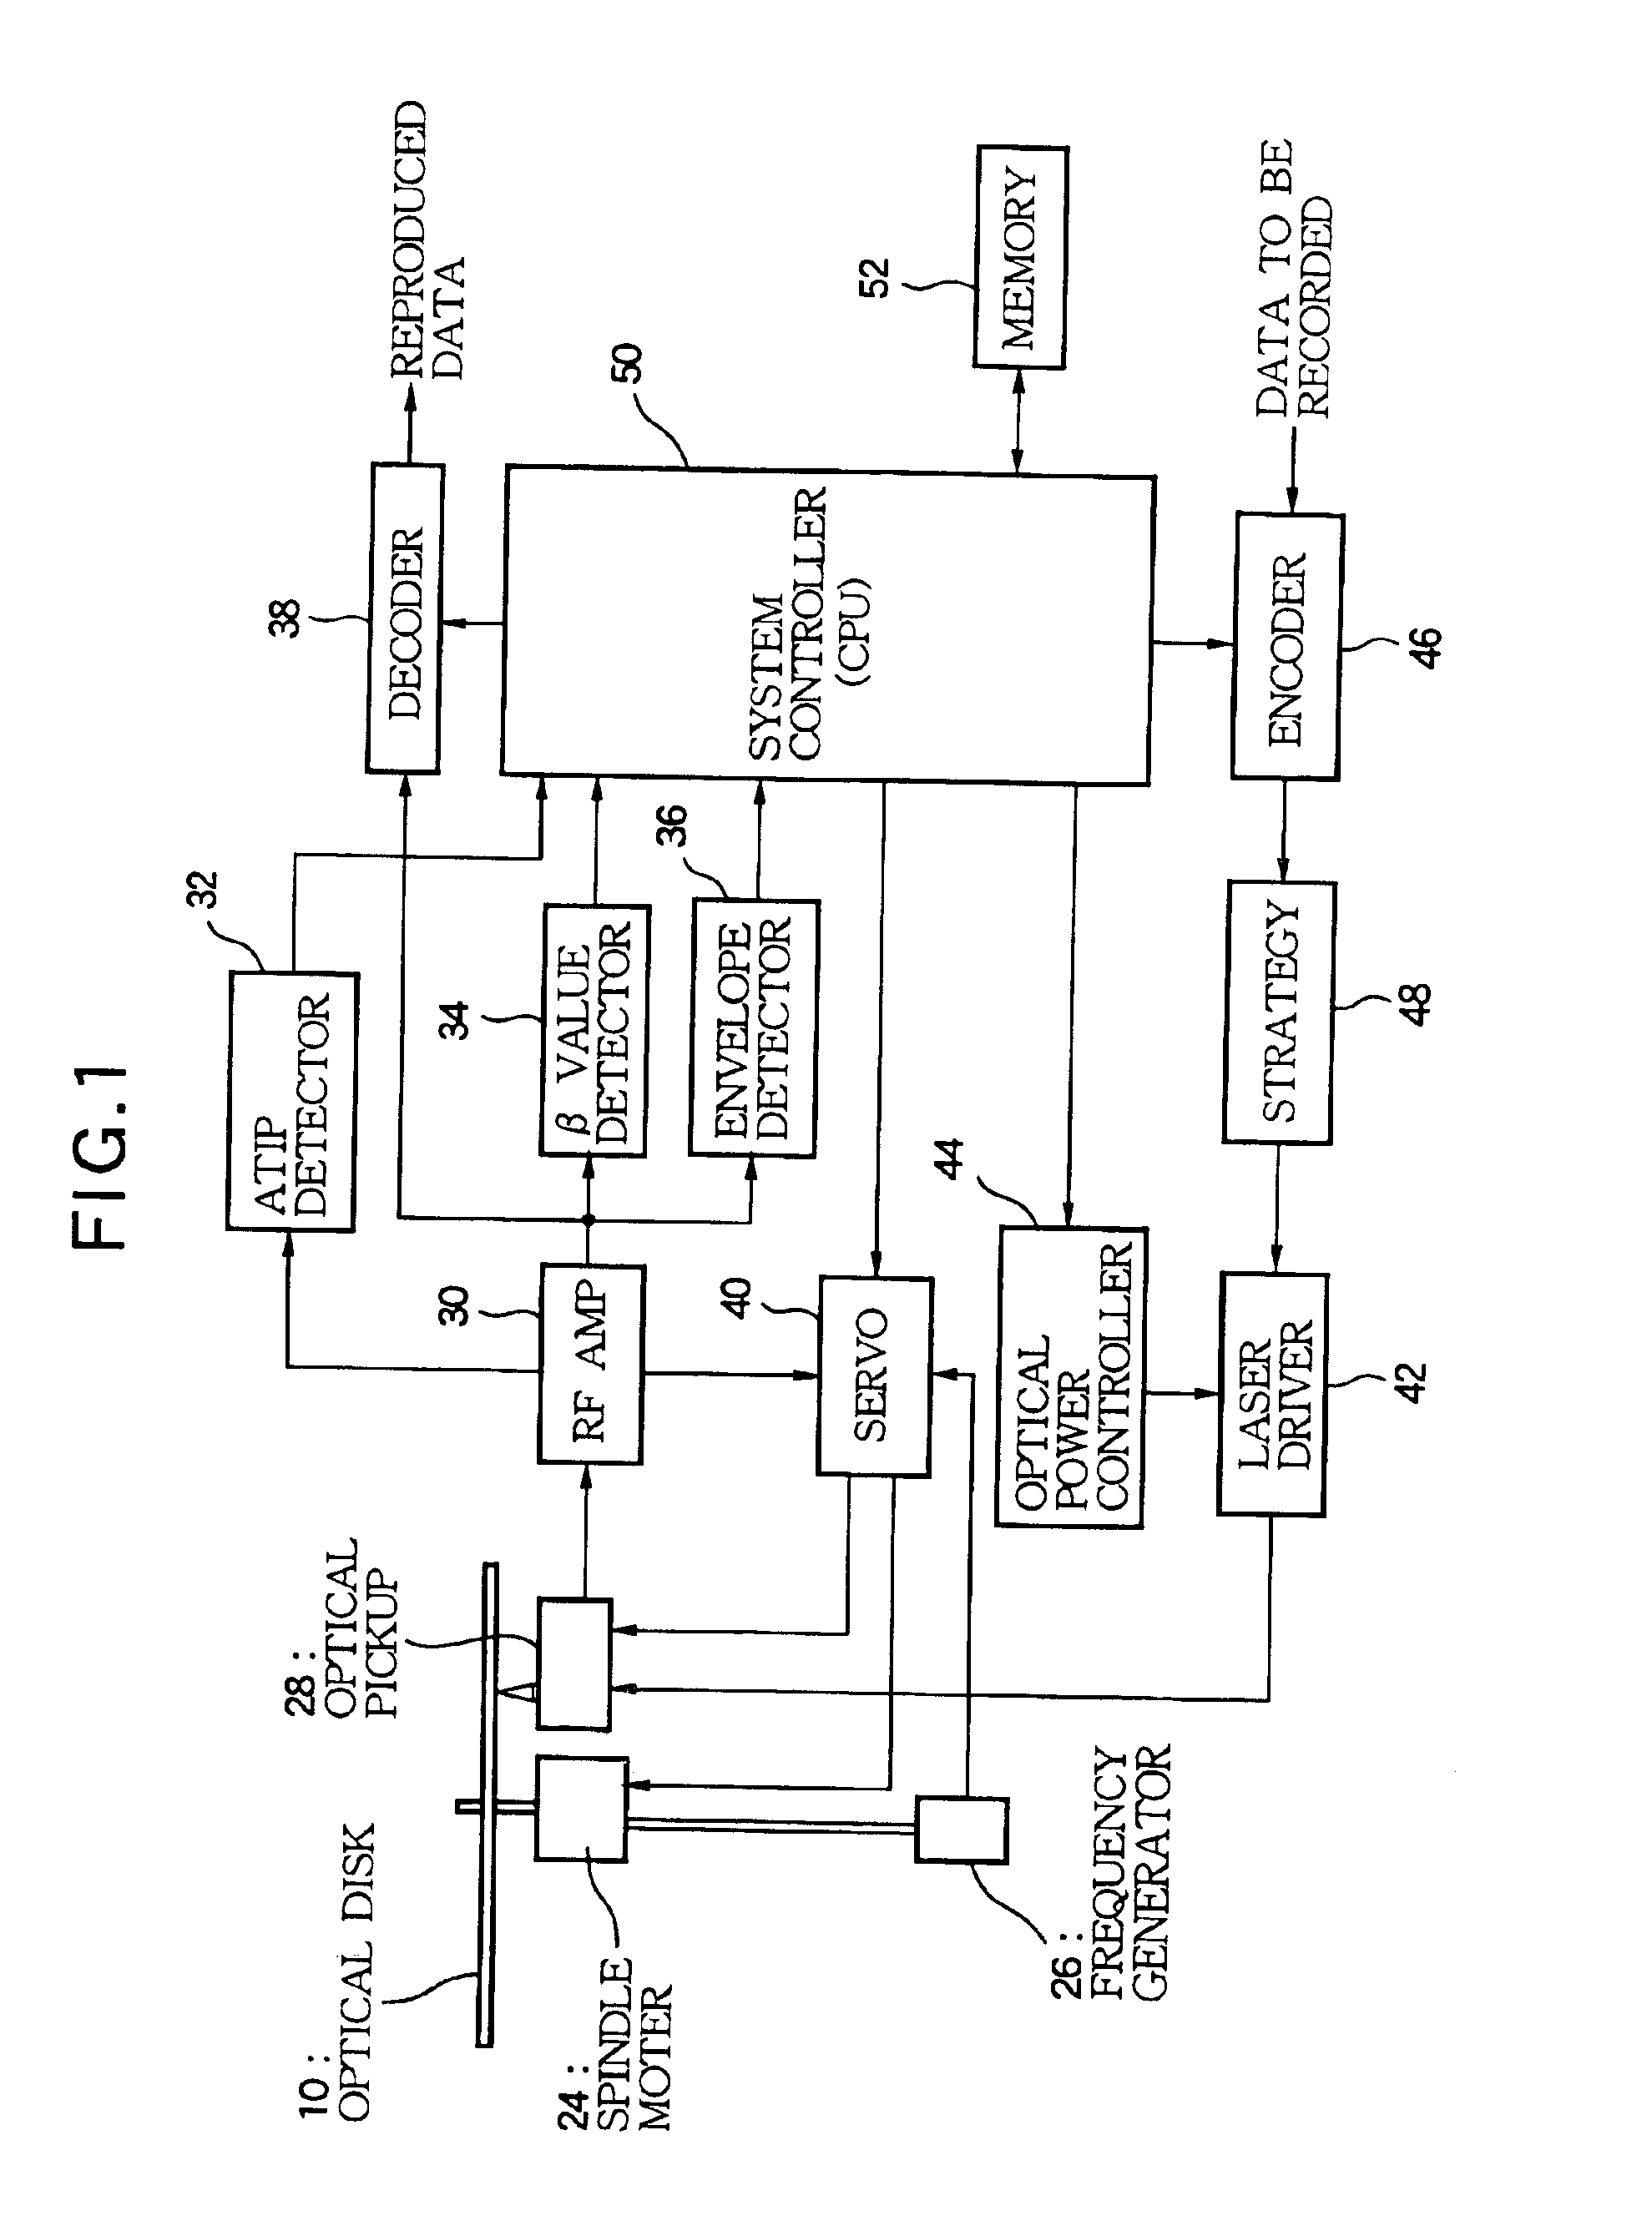 Optical recording method performing power control with variable linear velocity